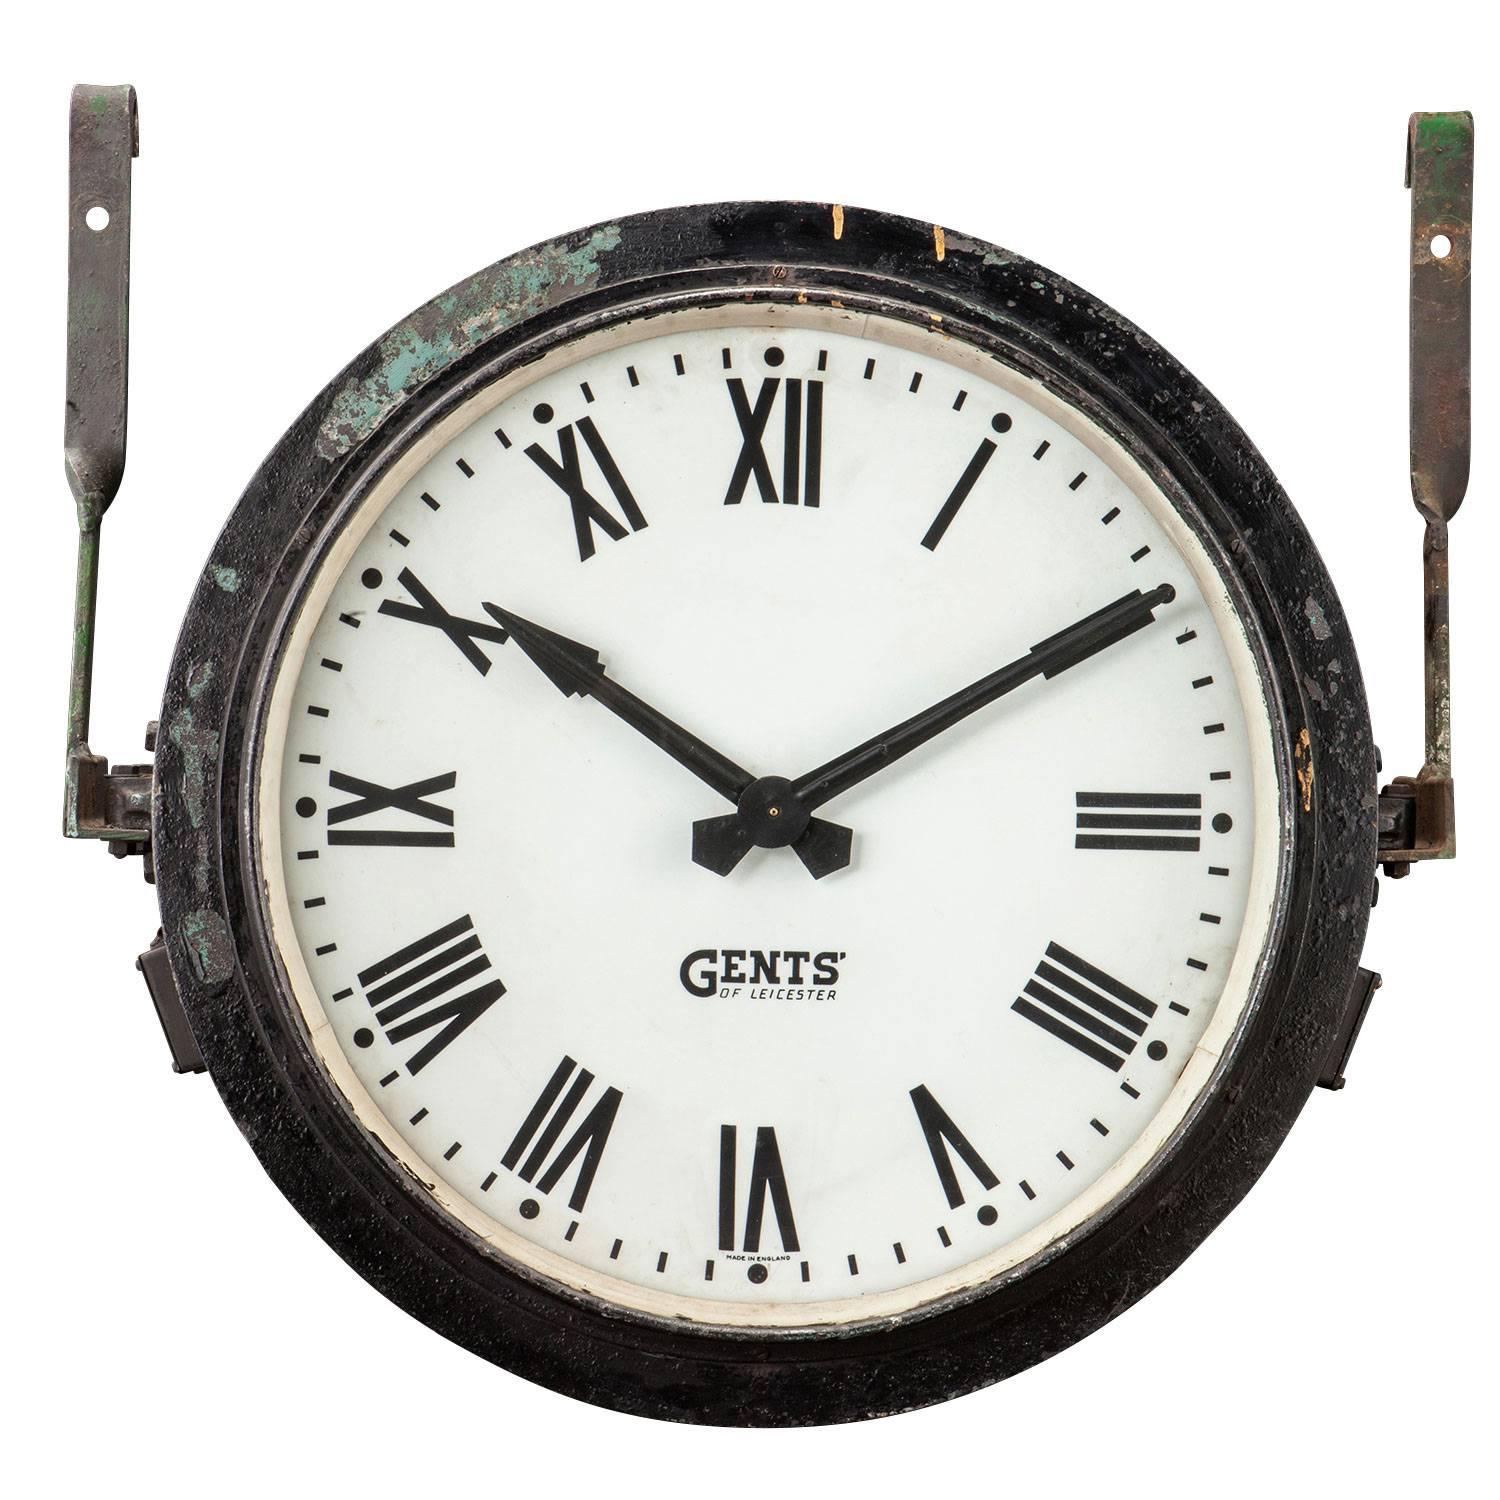 Gents of Leicester Station Clock